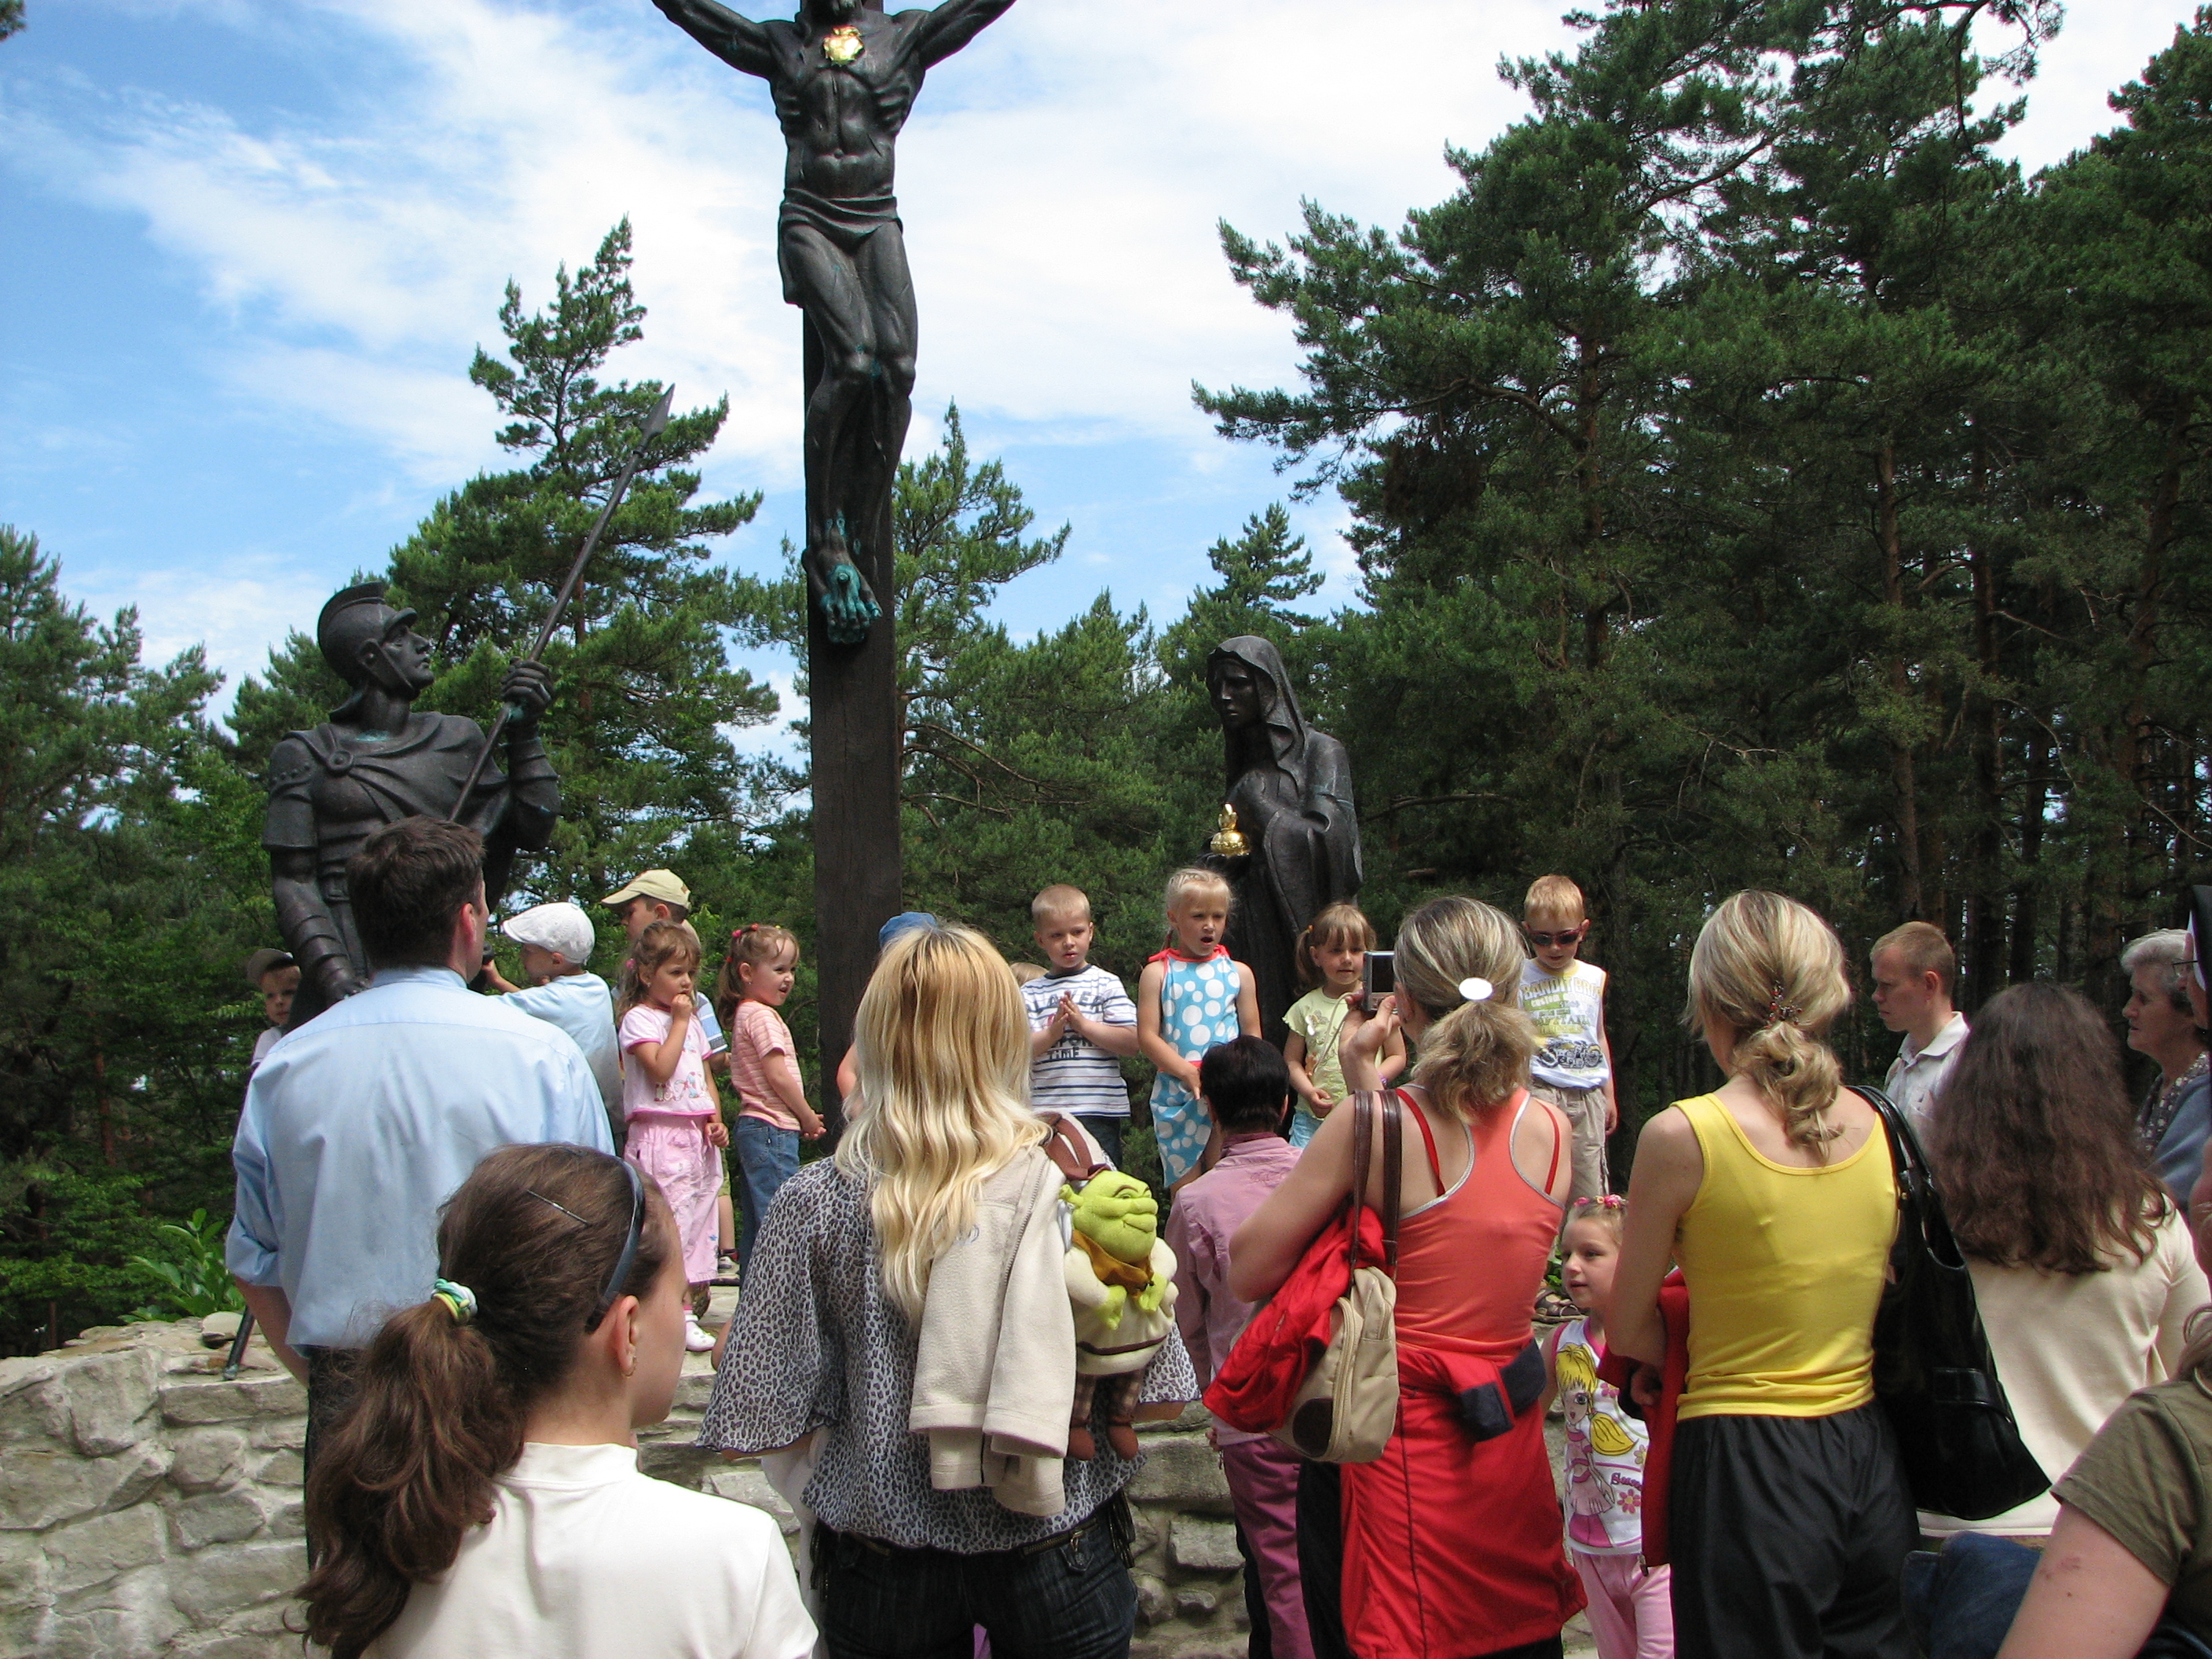 Catholic kids with parents during a pilgrimage to a sanctuary